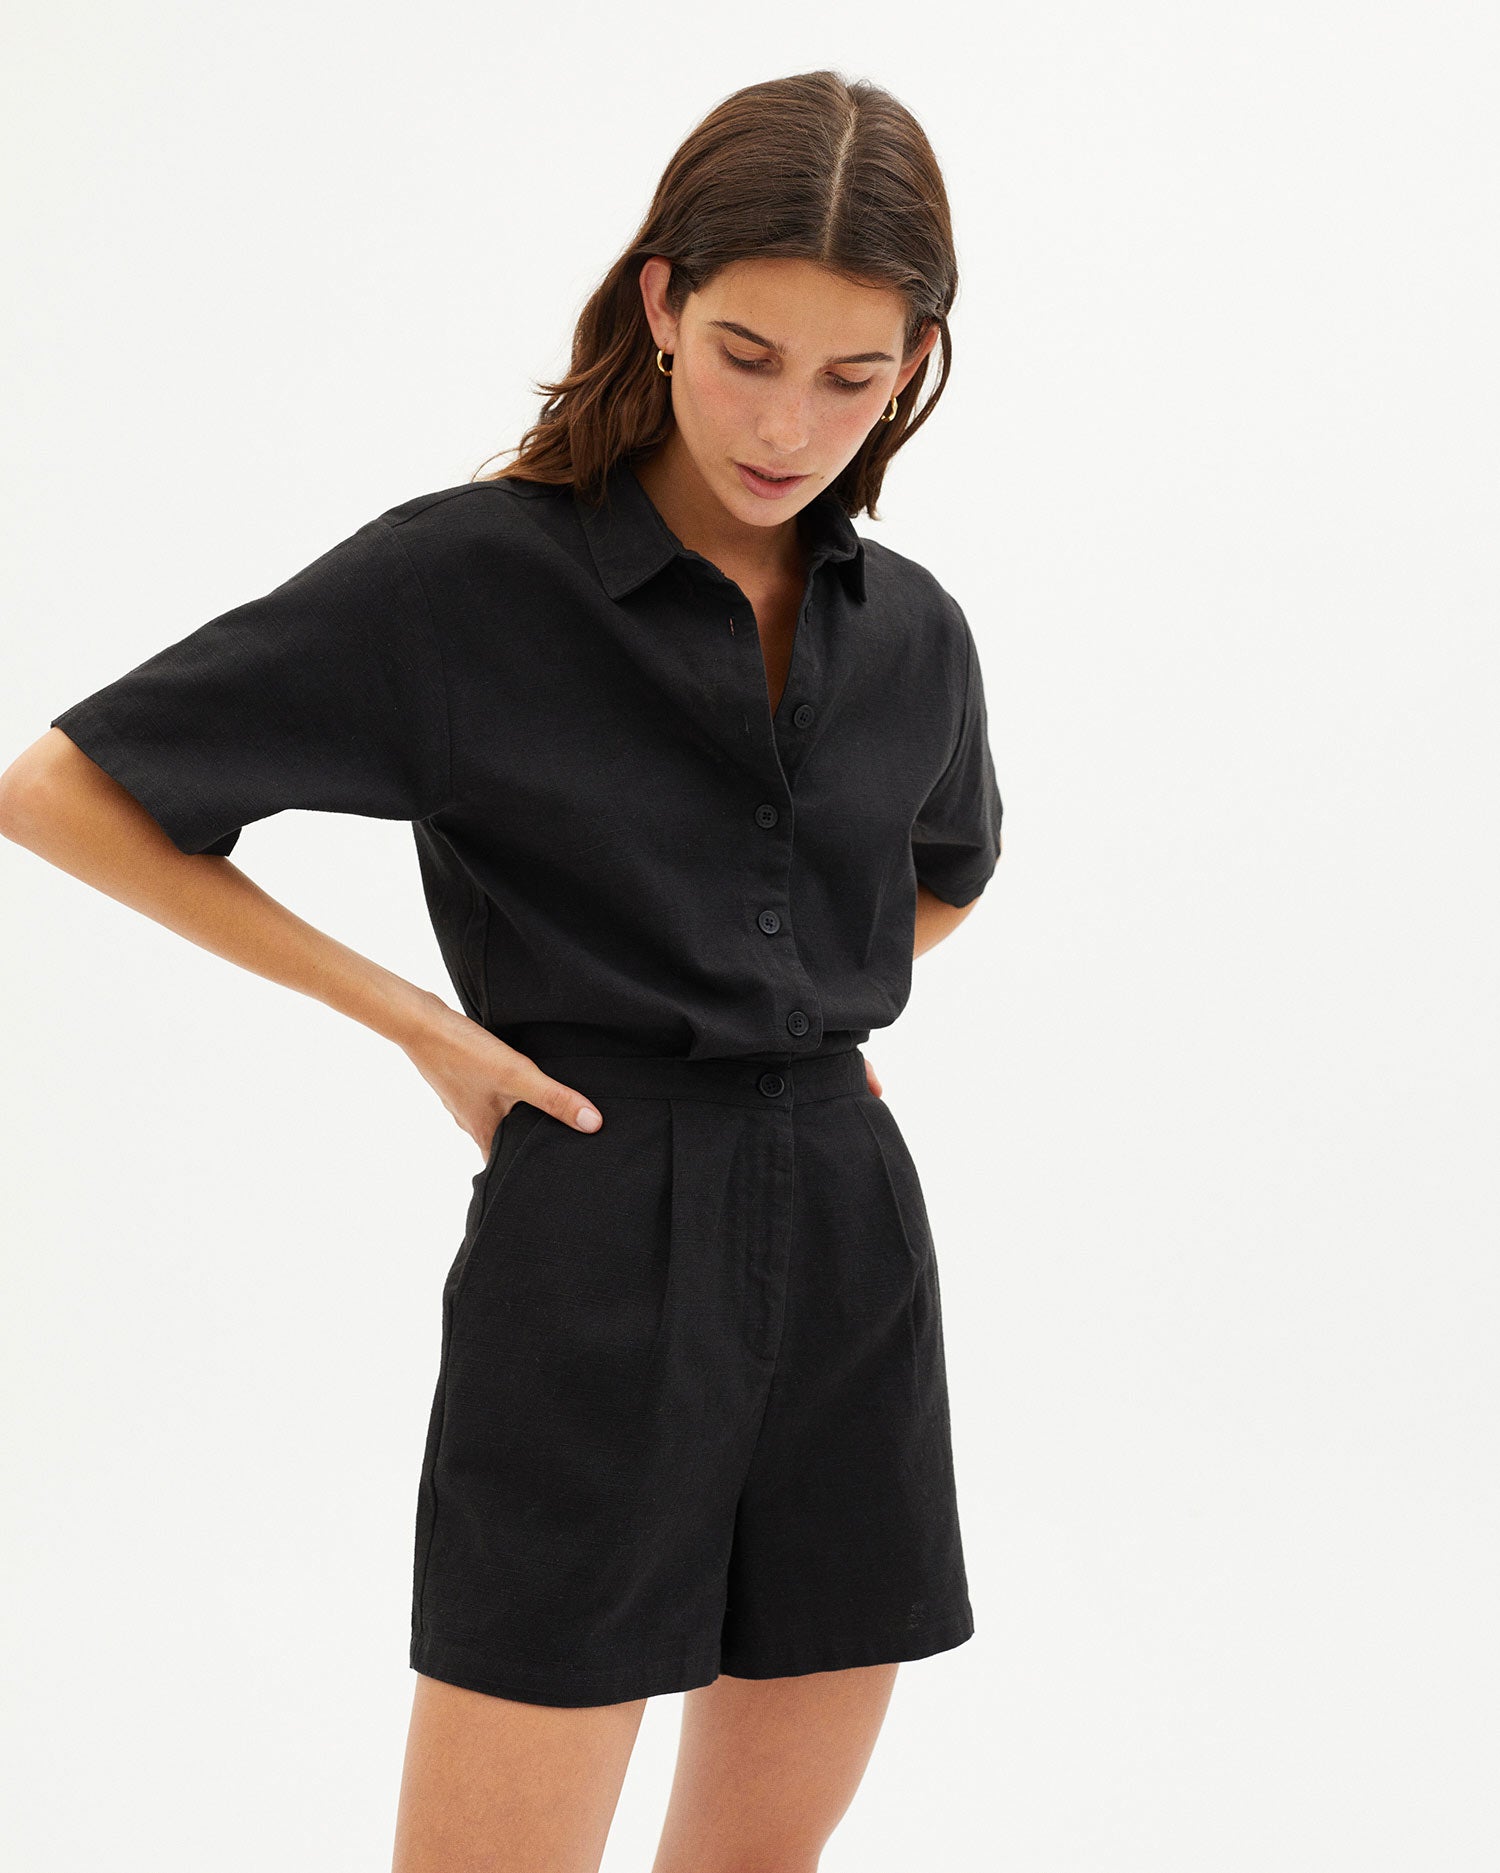 Thinking Mu Agata Jumpsuit Romper in Black. A classic romper that makes getting dressed in the morning simple. Dress it up or down with the right accessories. Made with 100% GOTS cotton.